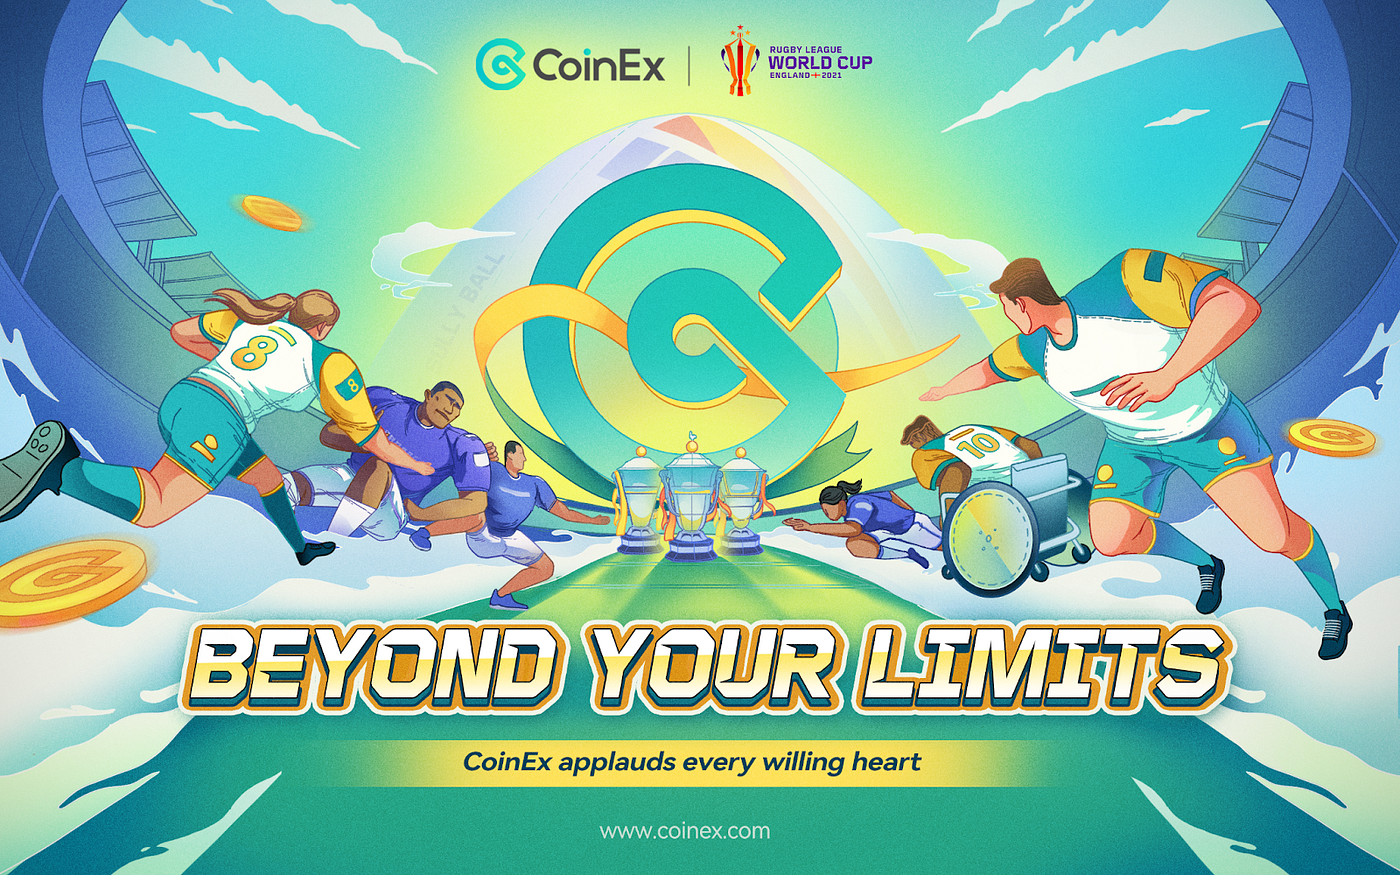 CoinEx and RLWC Party Game Is Now Live